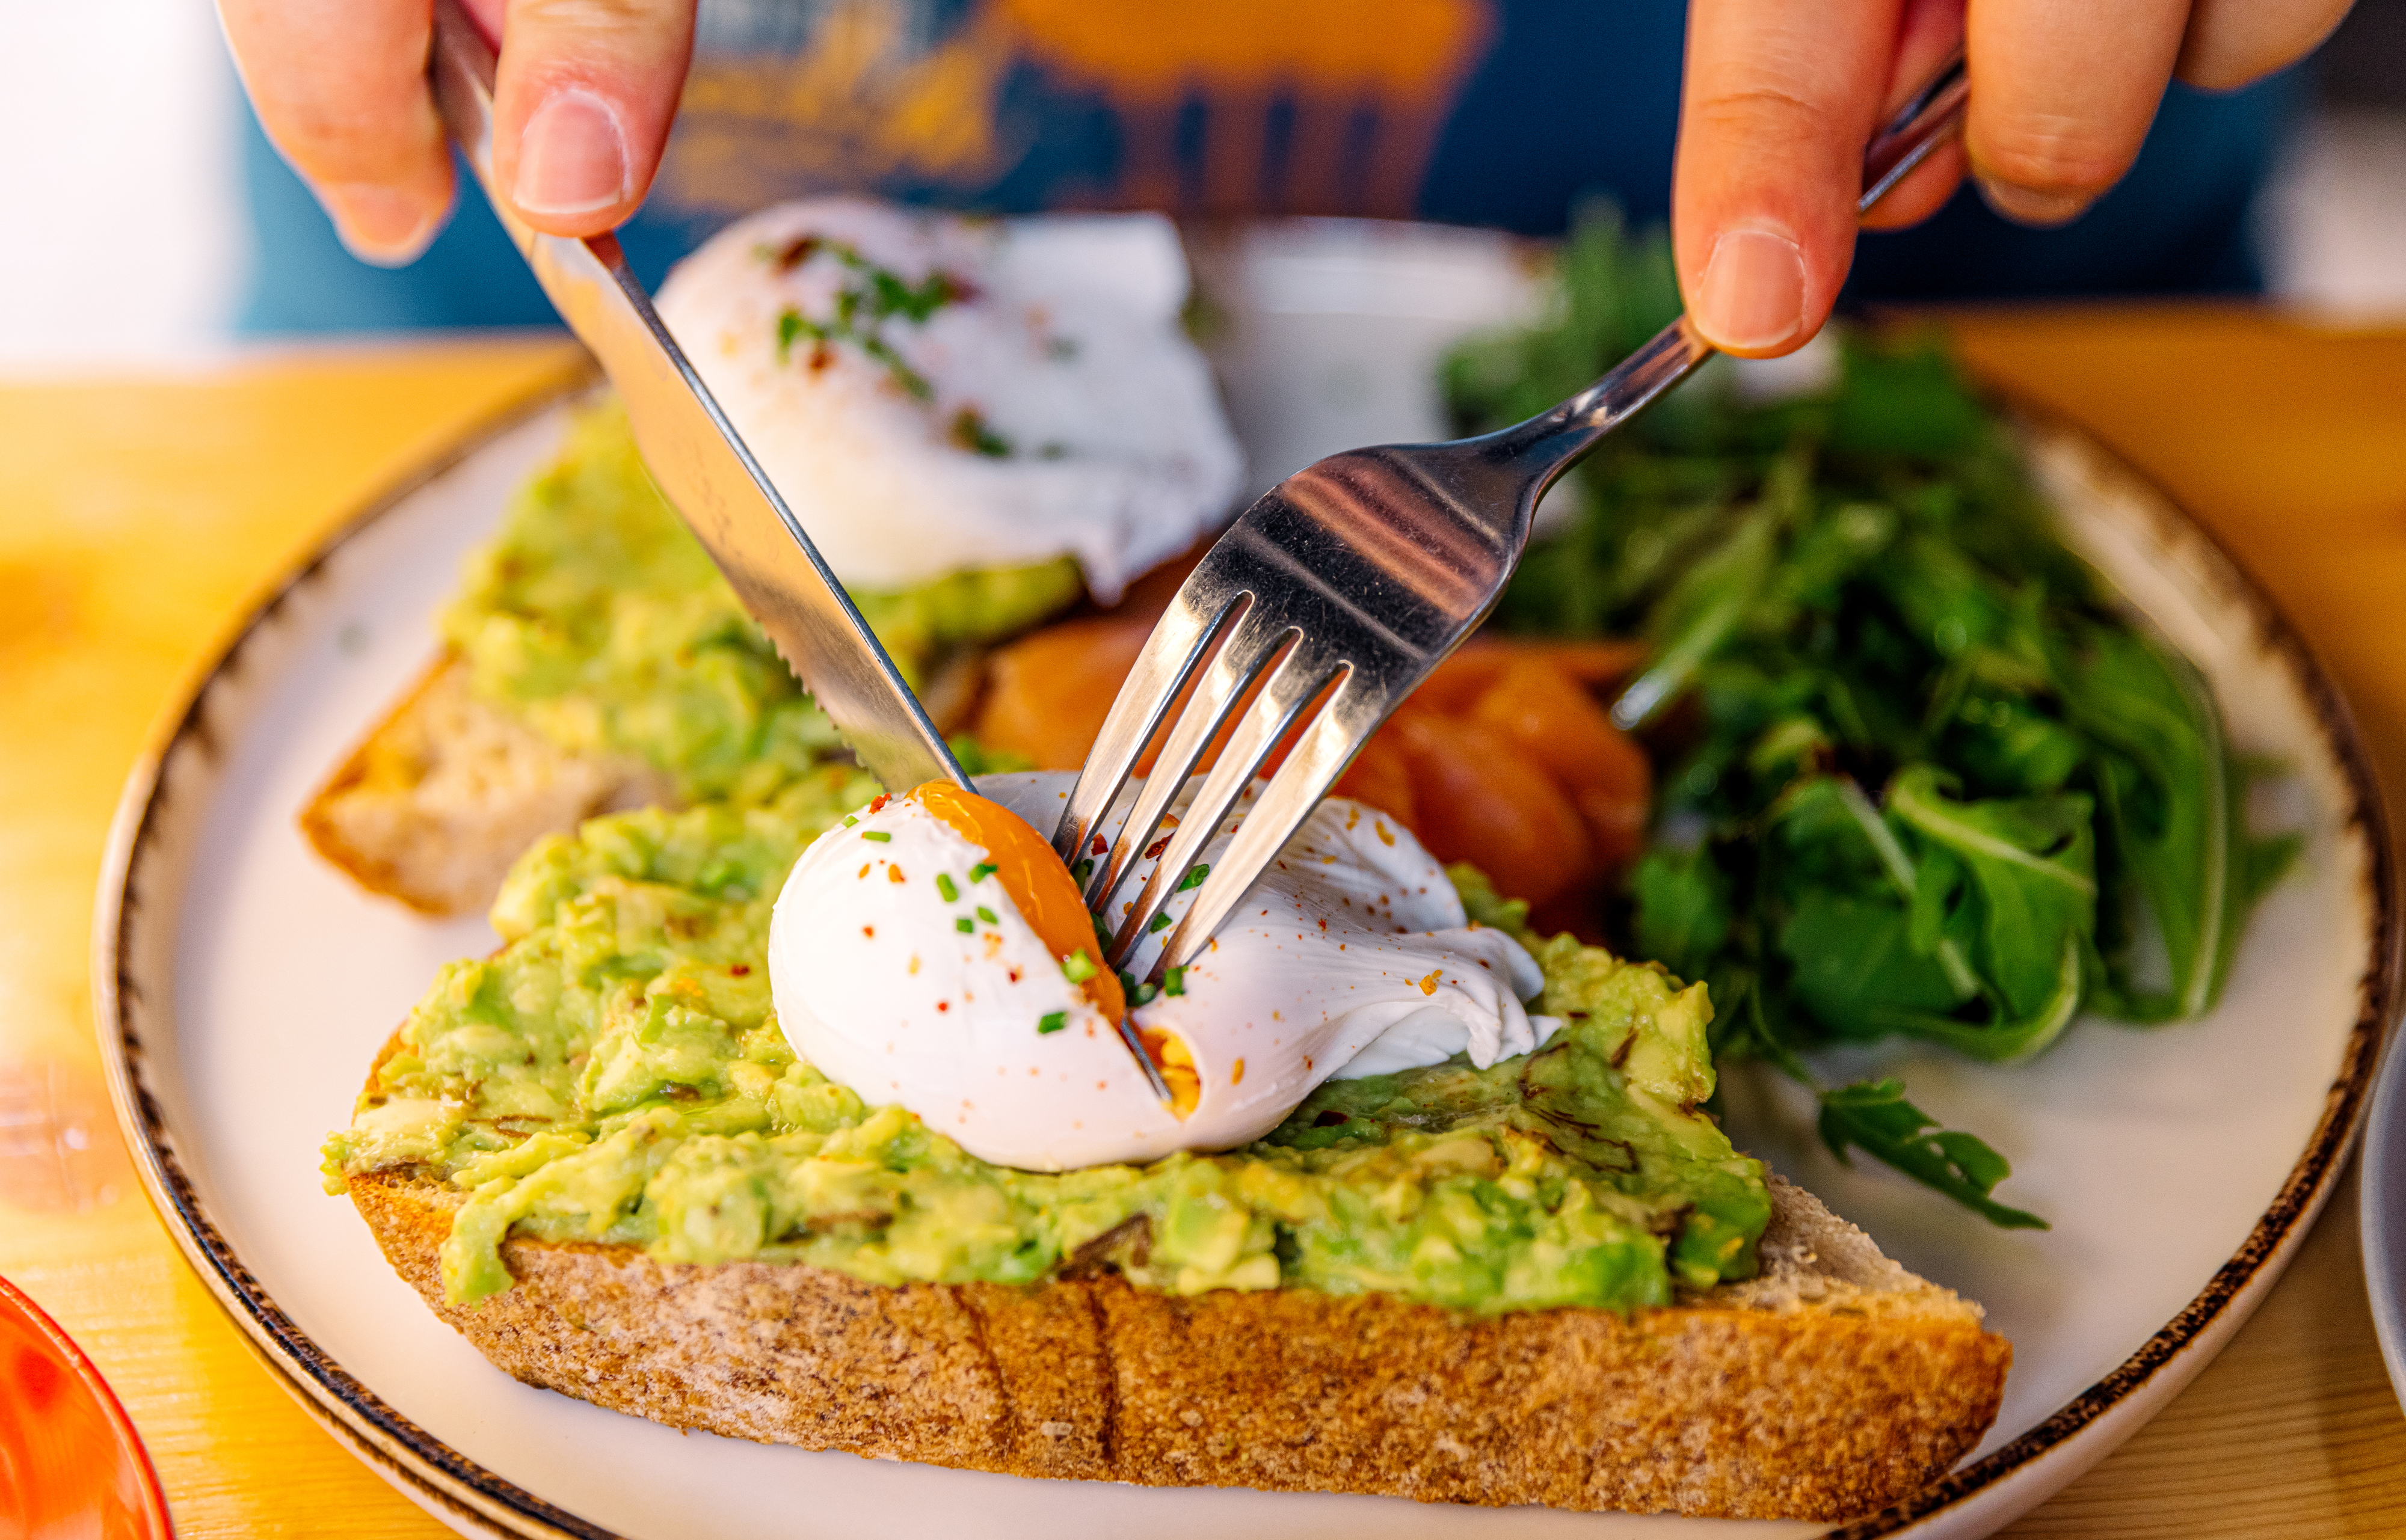 Person cutting into a poached egg on avocado toast with a side salad